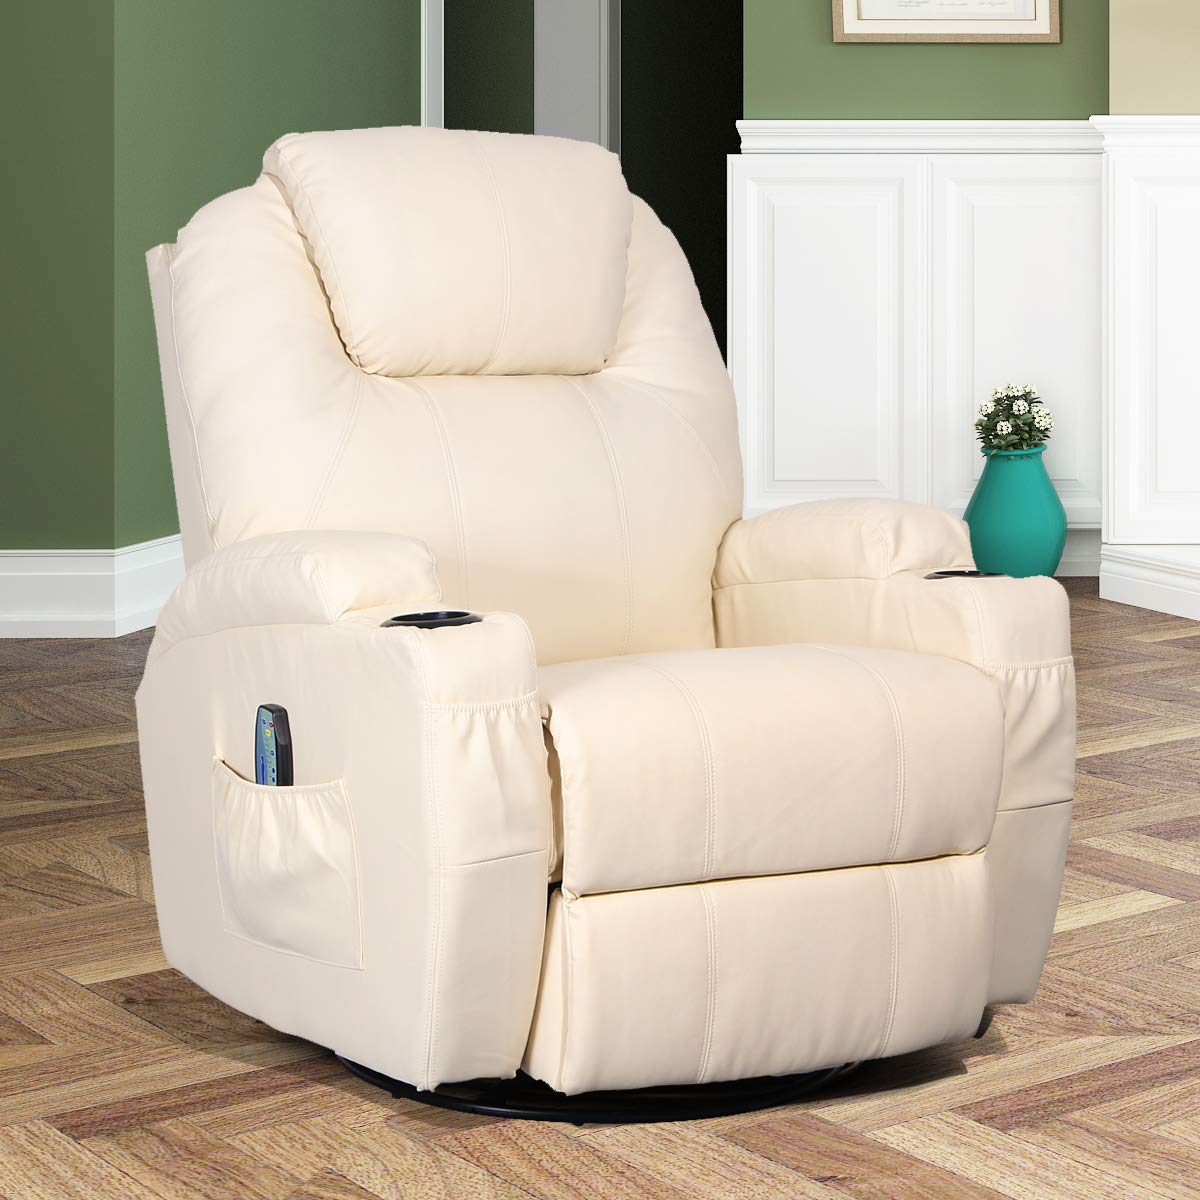 How To Close Recliner Chair